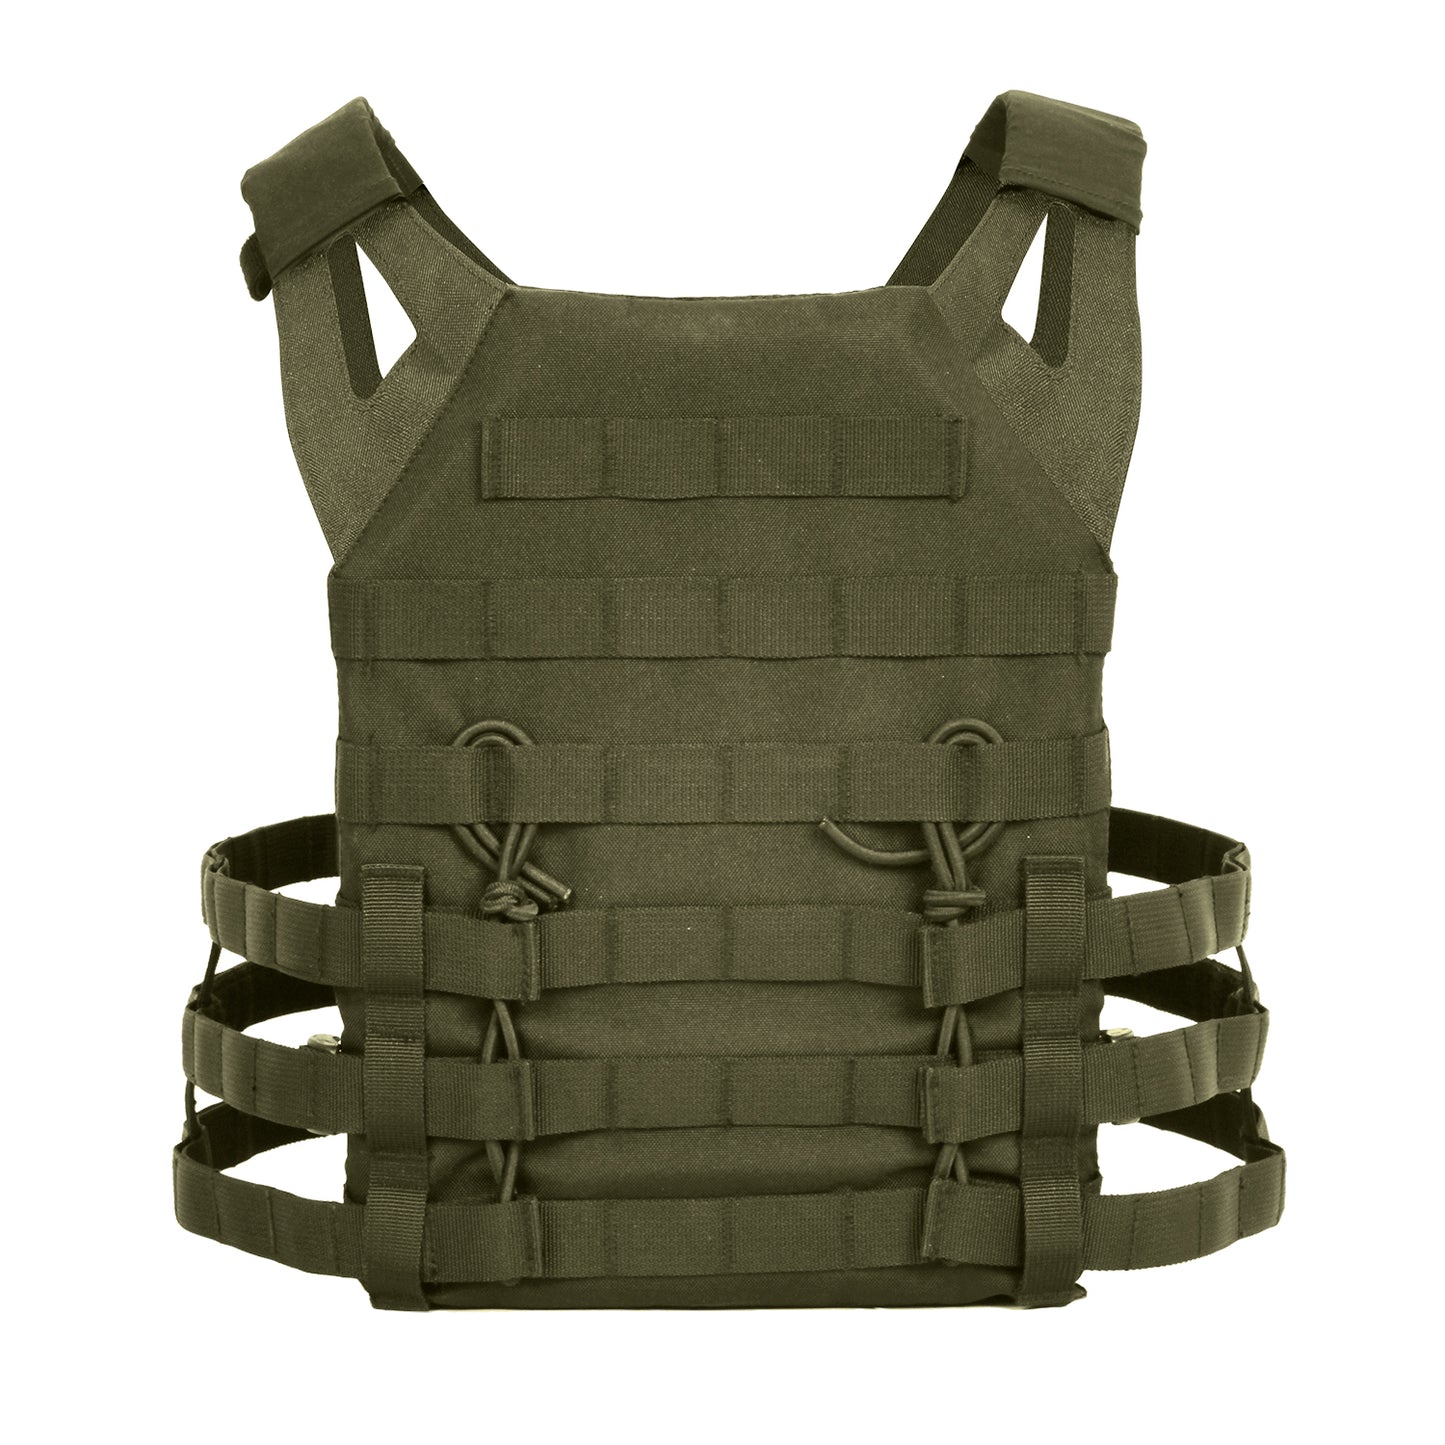 Rothco Lightweight Armor Plate Carrier Vest - Olive Drab